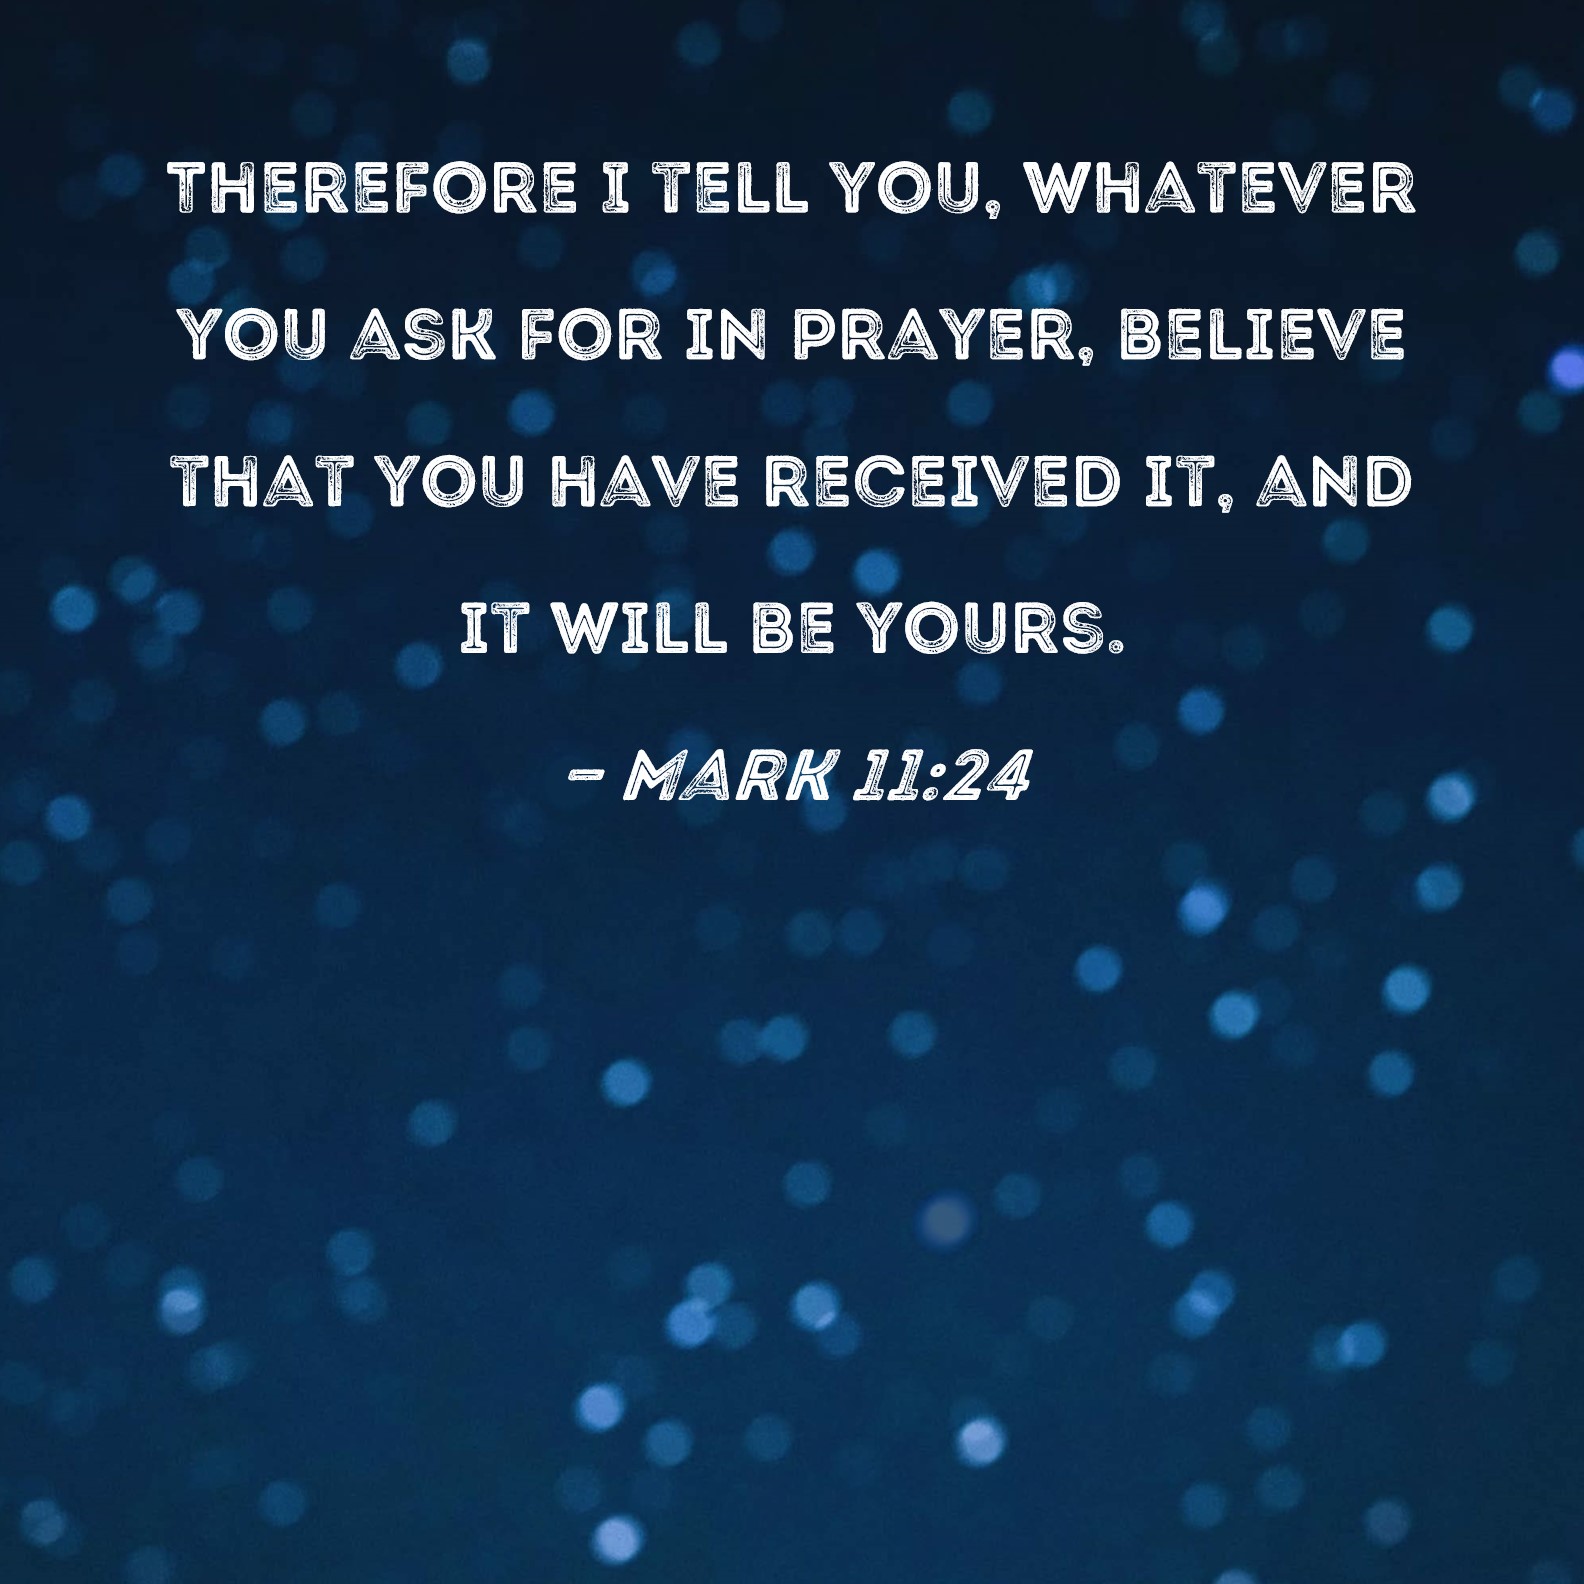 Mark 11:24 Therefore I tell you, whatever you ask for in prayer